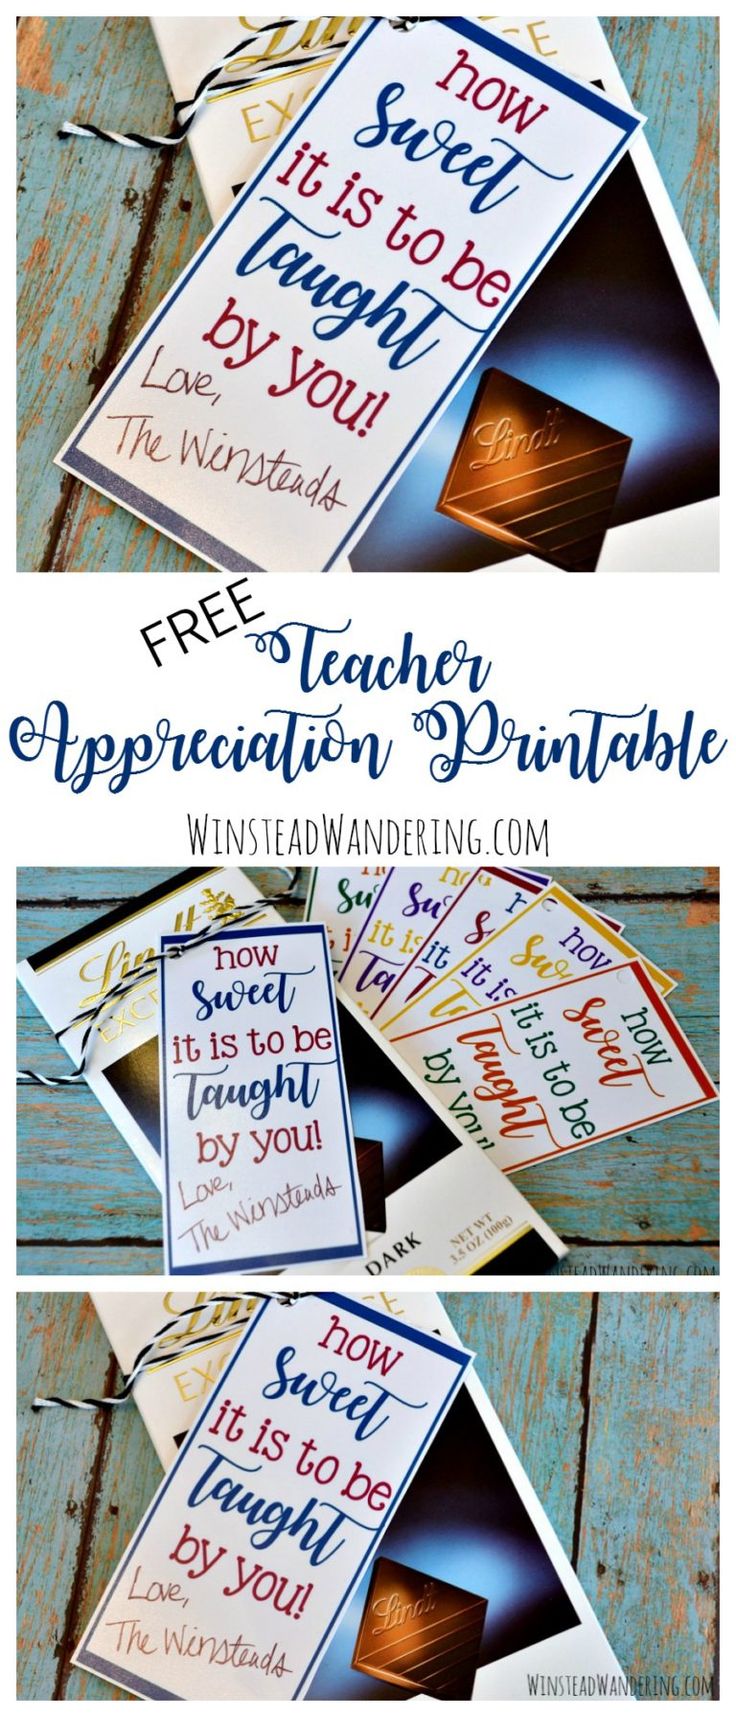 Snag a free teacher appreciation printable in a bunch of fun colors. Find inexpe...